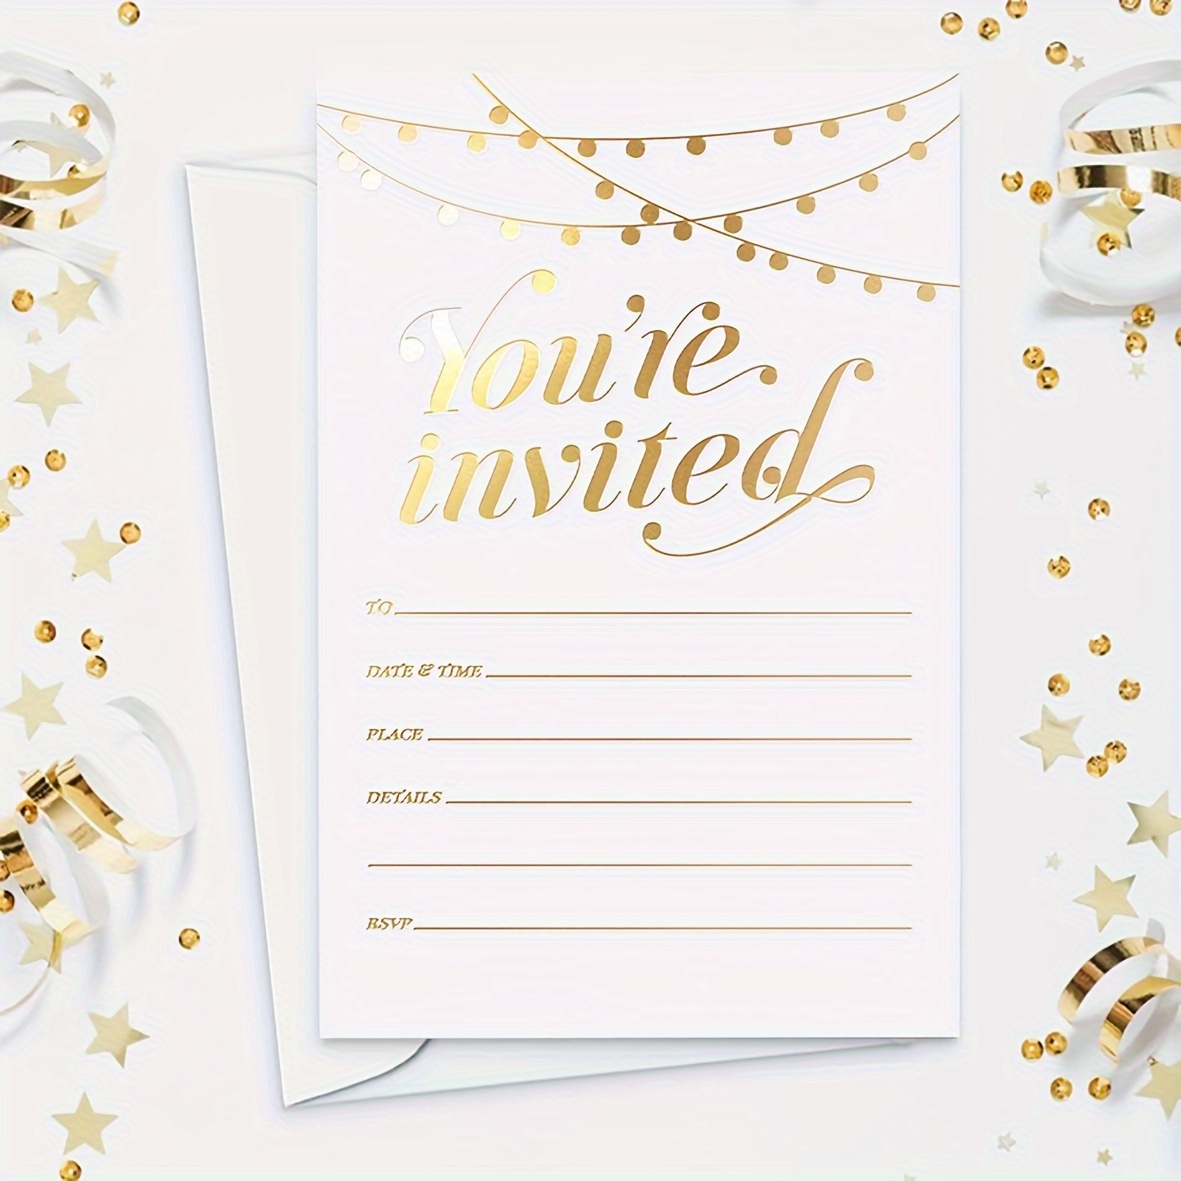 

25pcs Invitation To The Party! Golden Leaf Envelope With Traditional Invitations, Wedding, Bridal Shower Invitations, Housewarming Birthdays And Invitations